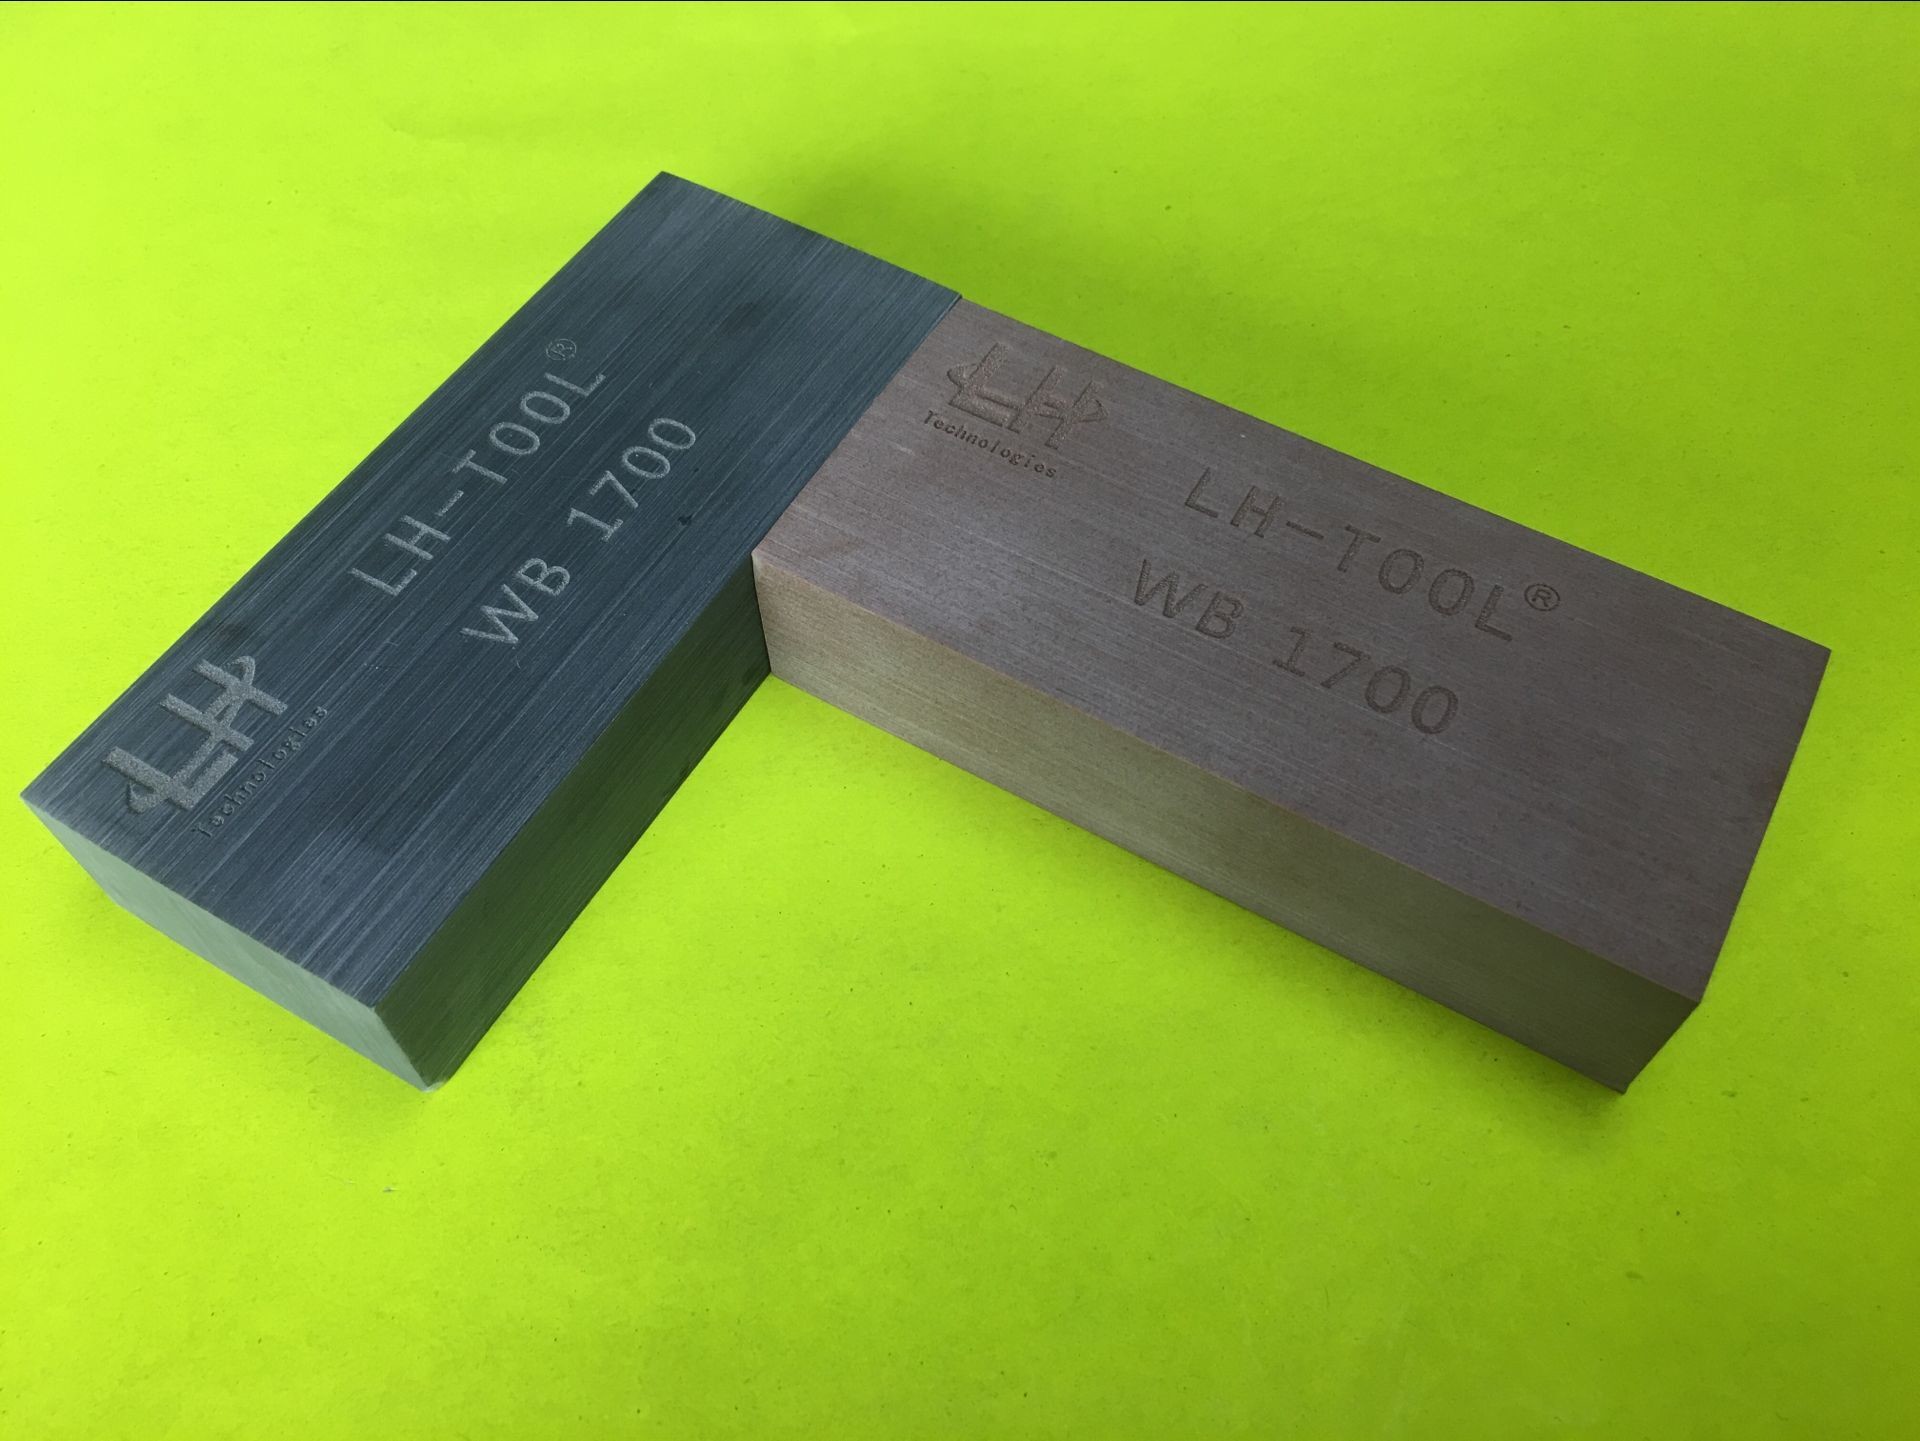 China Professional High Density Model Making Board , Epoxy Mold Making Block for sale